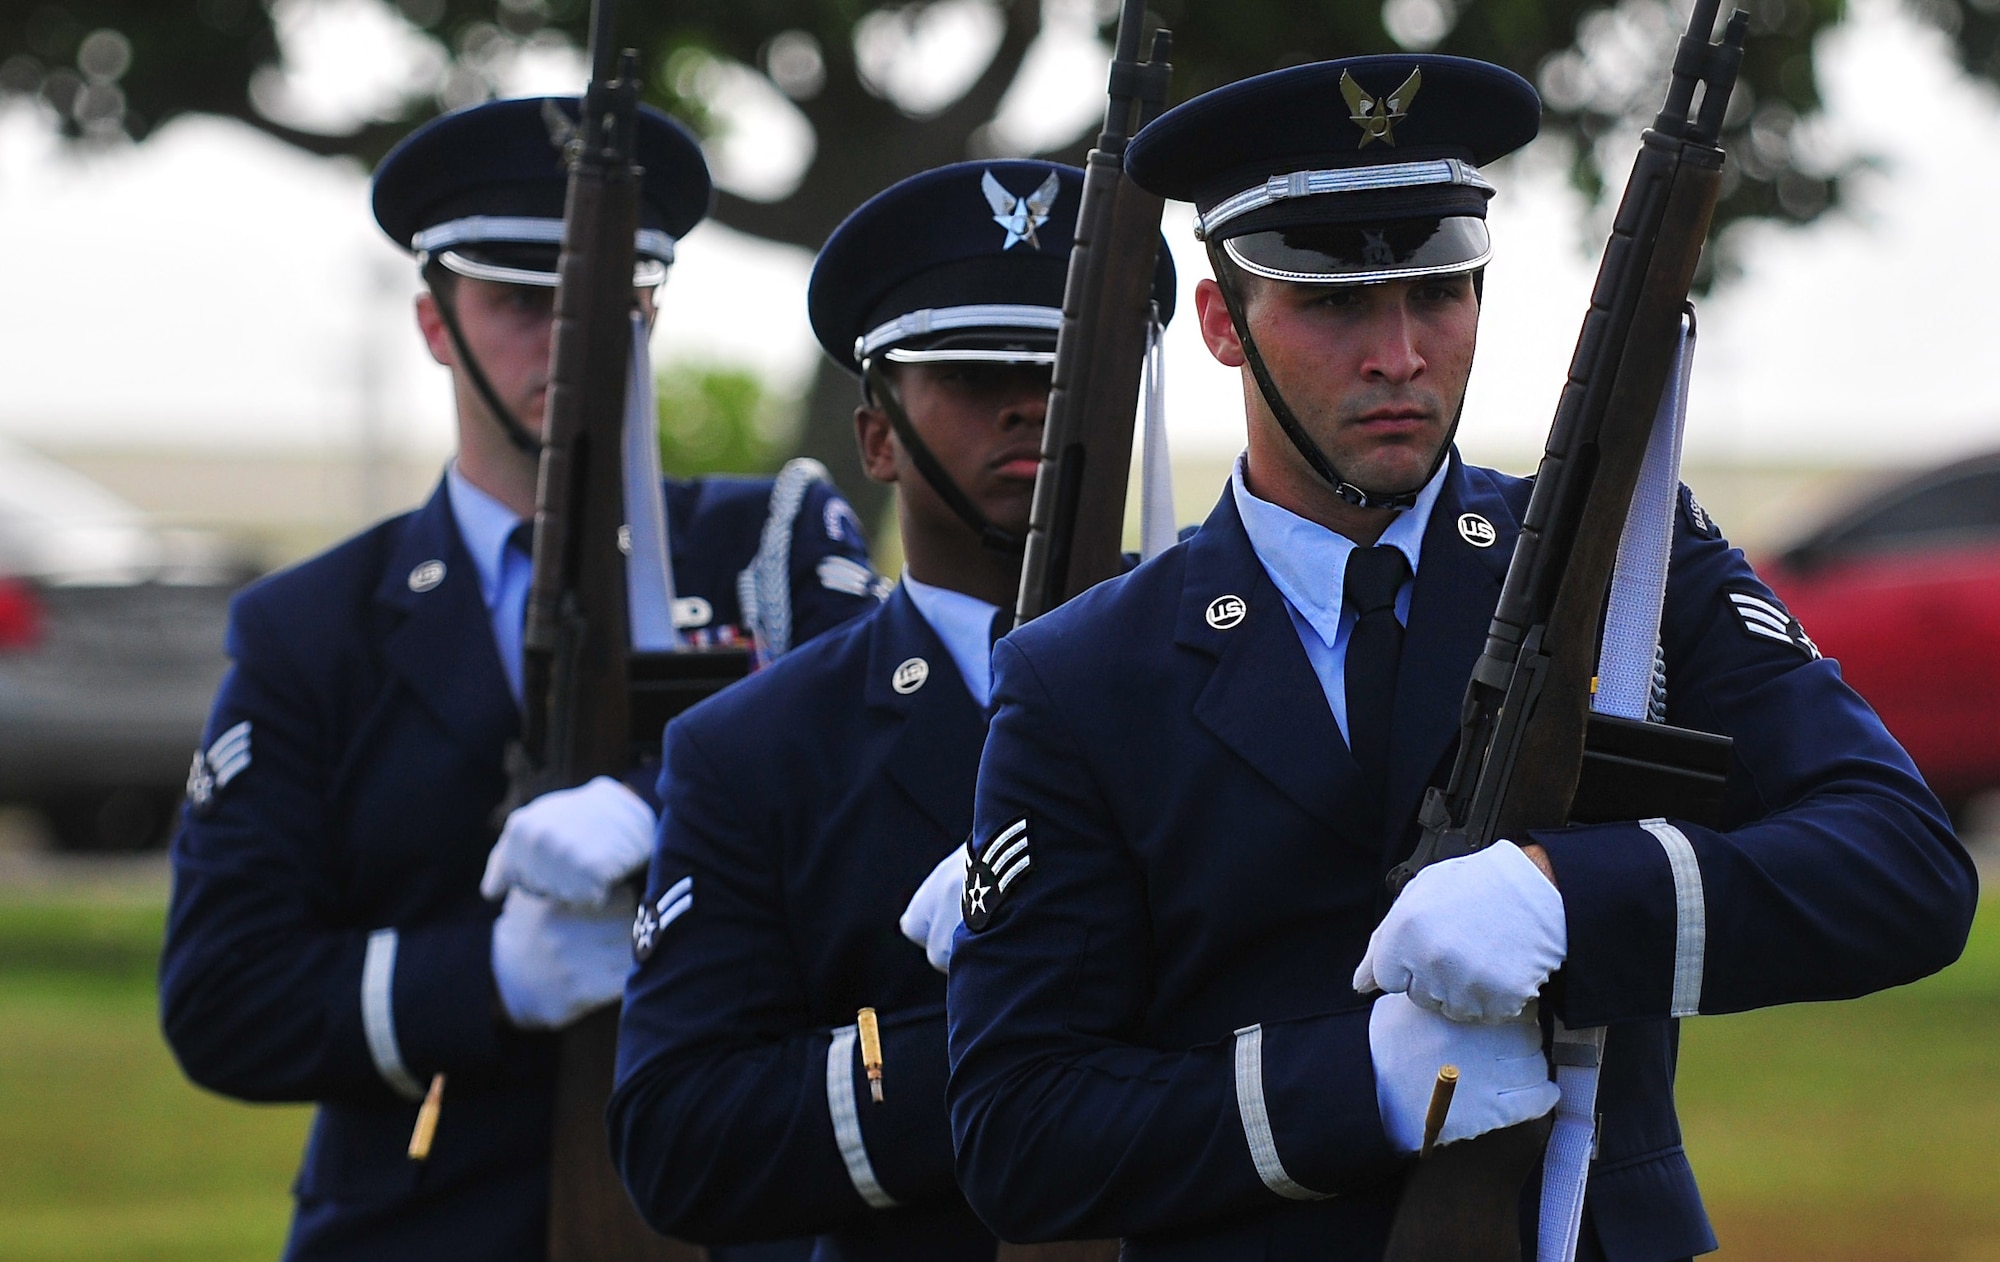 Andersen Air Force Base Honorguardsmen charge their ceremonial rifles during the firing party sequence of a Police Week retreat ceremony, May 13, 2015, at Andersen AFB, Guam. The ceremony recognized law enforcement professionals in honor of National Police Week. Multiple events served to showcase Andersen AFB security forces and the sacrifices police forces make to protect the community. (U.S. Air Force photo by Senior Airman Alexander W. Riedel/Released)